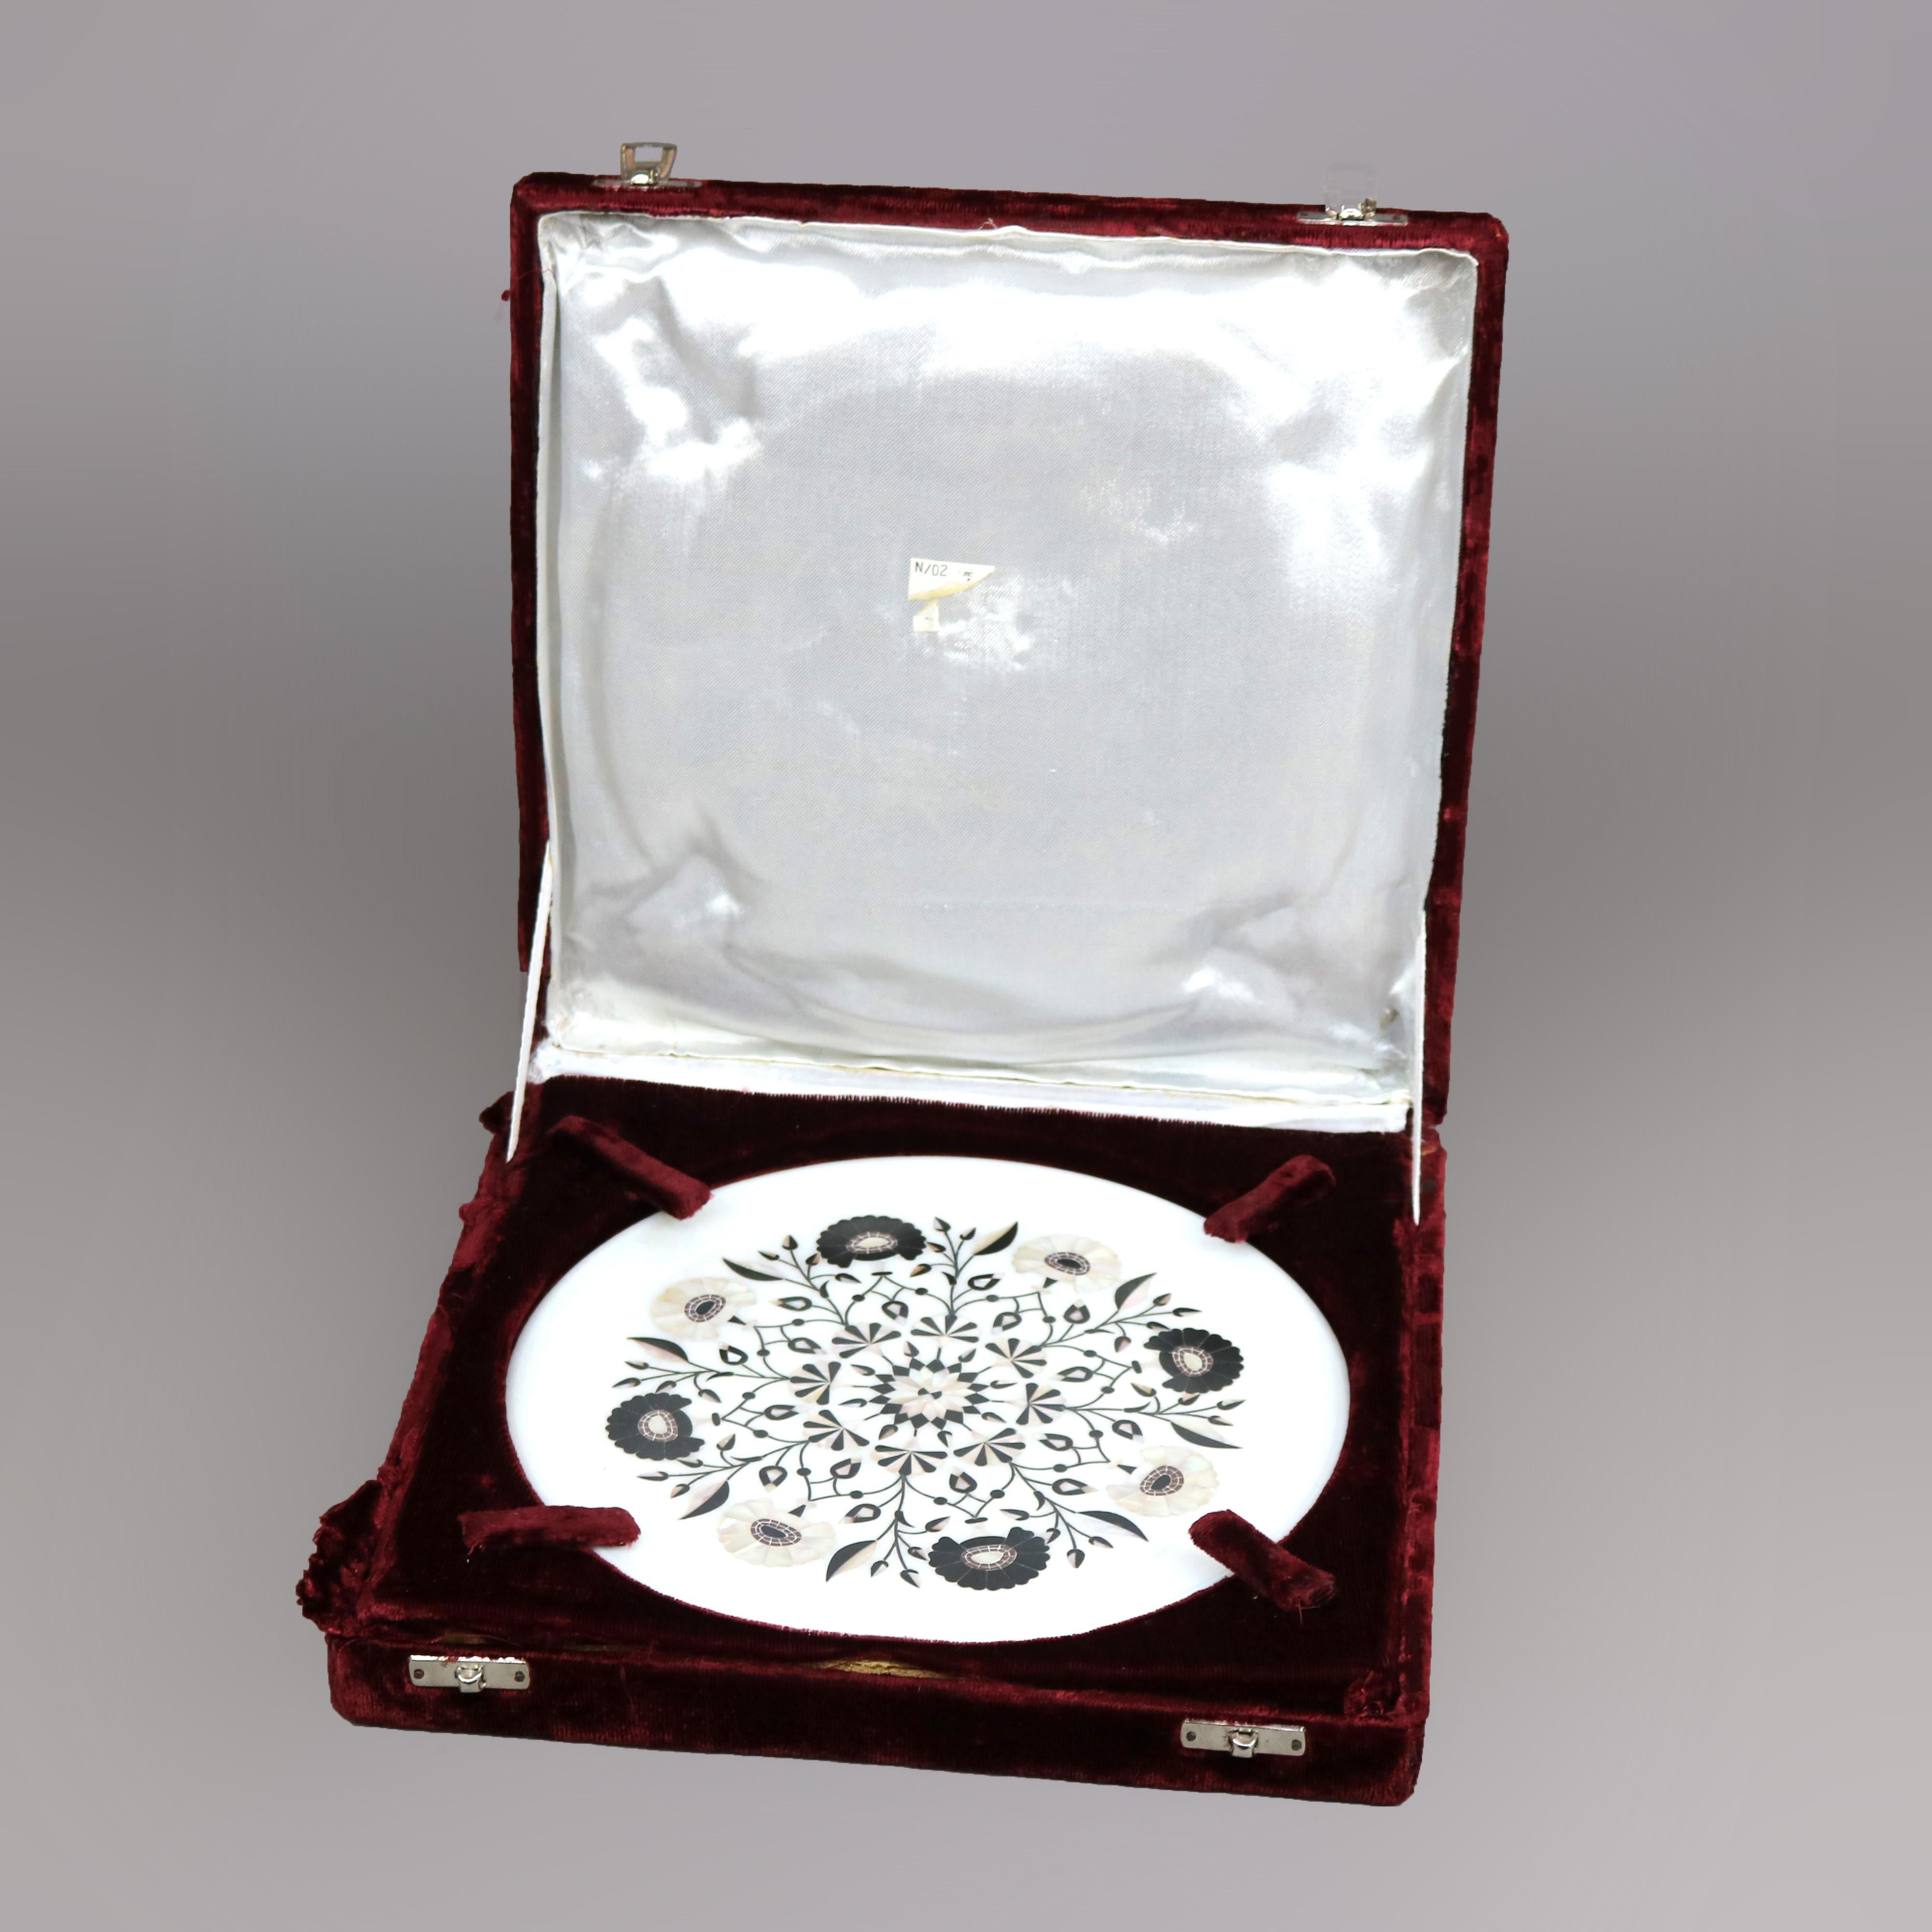 A carved marble presentation plate offers inlaid mother of pearl and ebony stylized floral design, housed in original presenttion box, c1940

Measures - .5''H x 9.25''W x 9.25''D; case 2'' x 11.75'' x 11.75''.